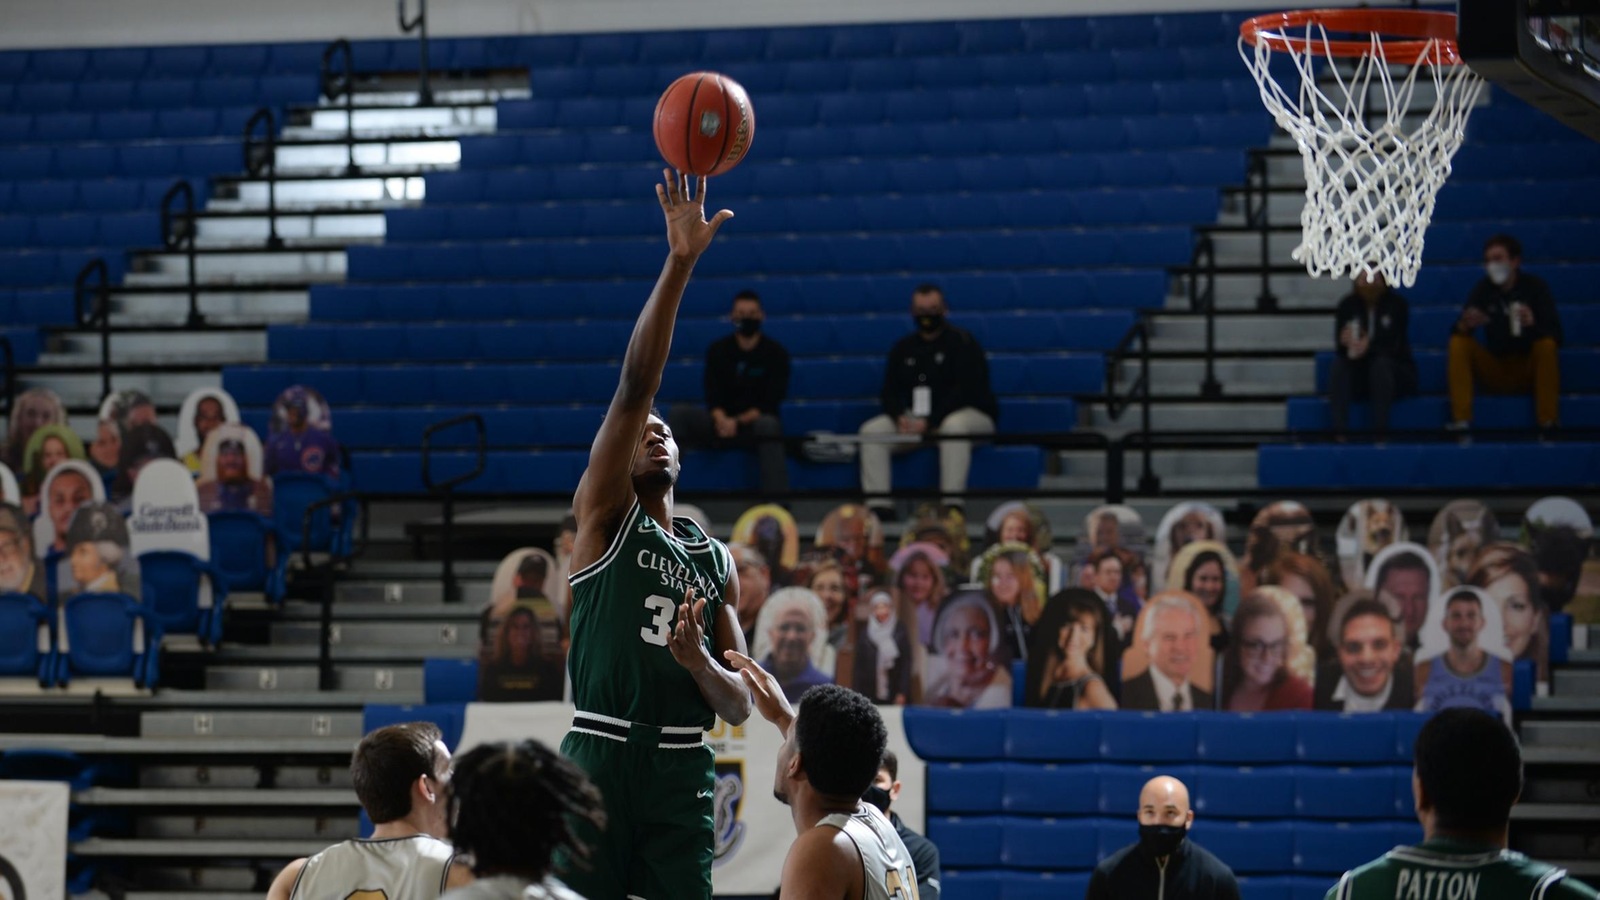 Cleveland State Opens League Play with a Win at Purdue Fort Wayne